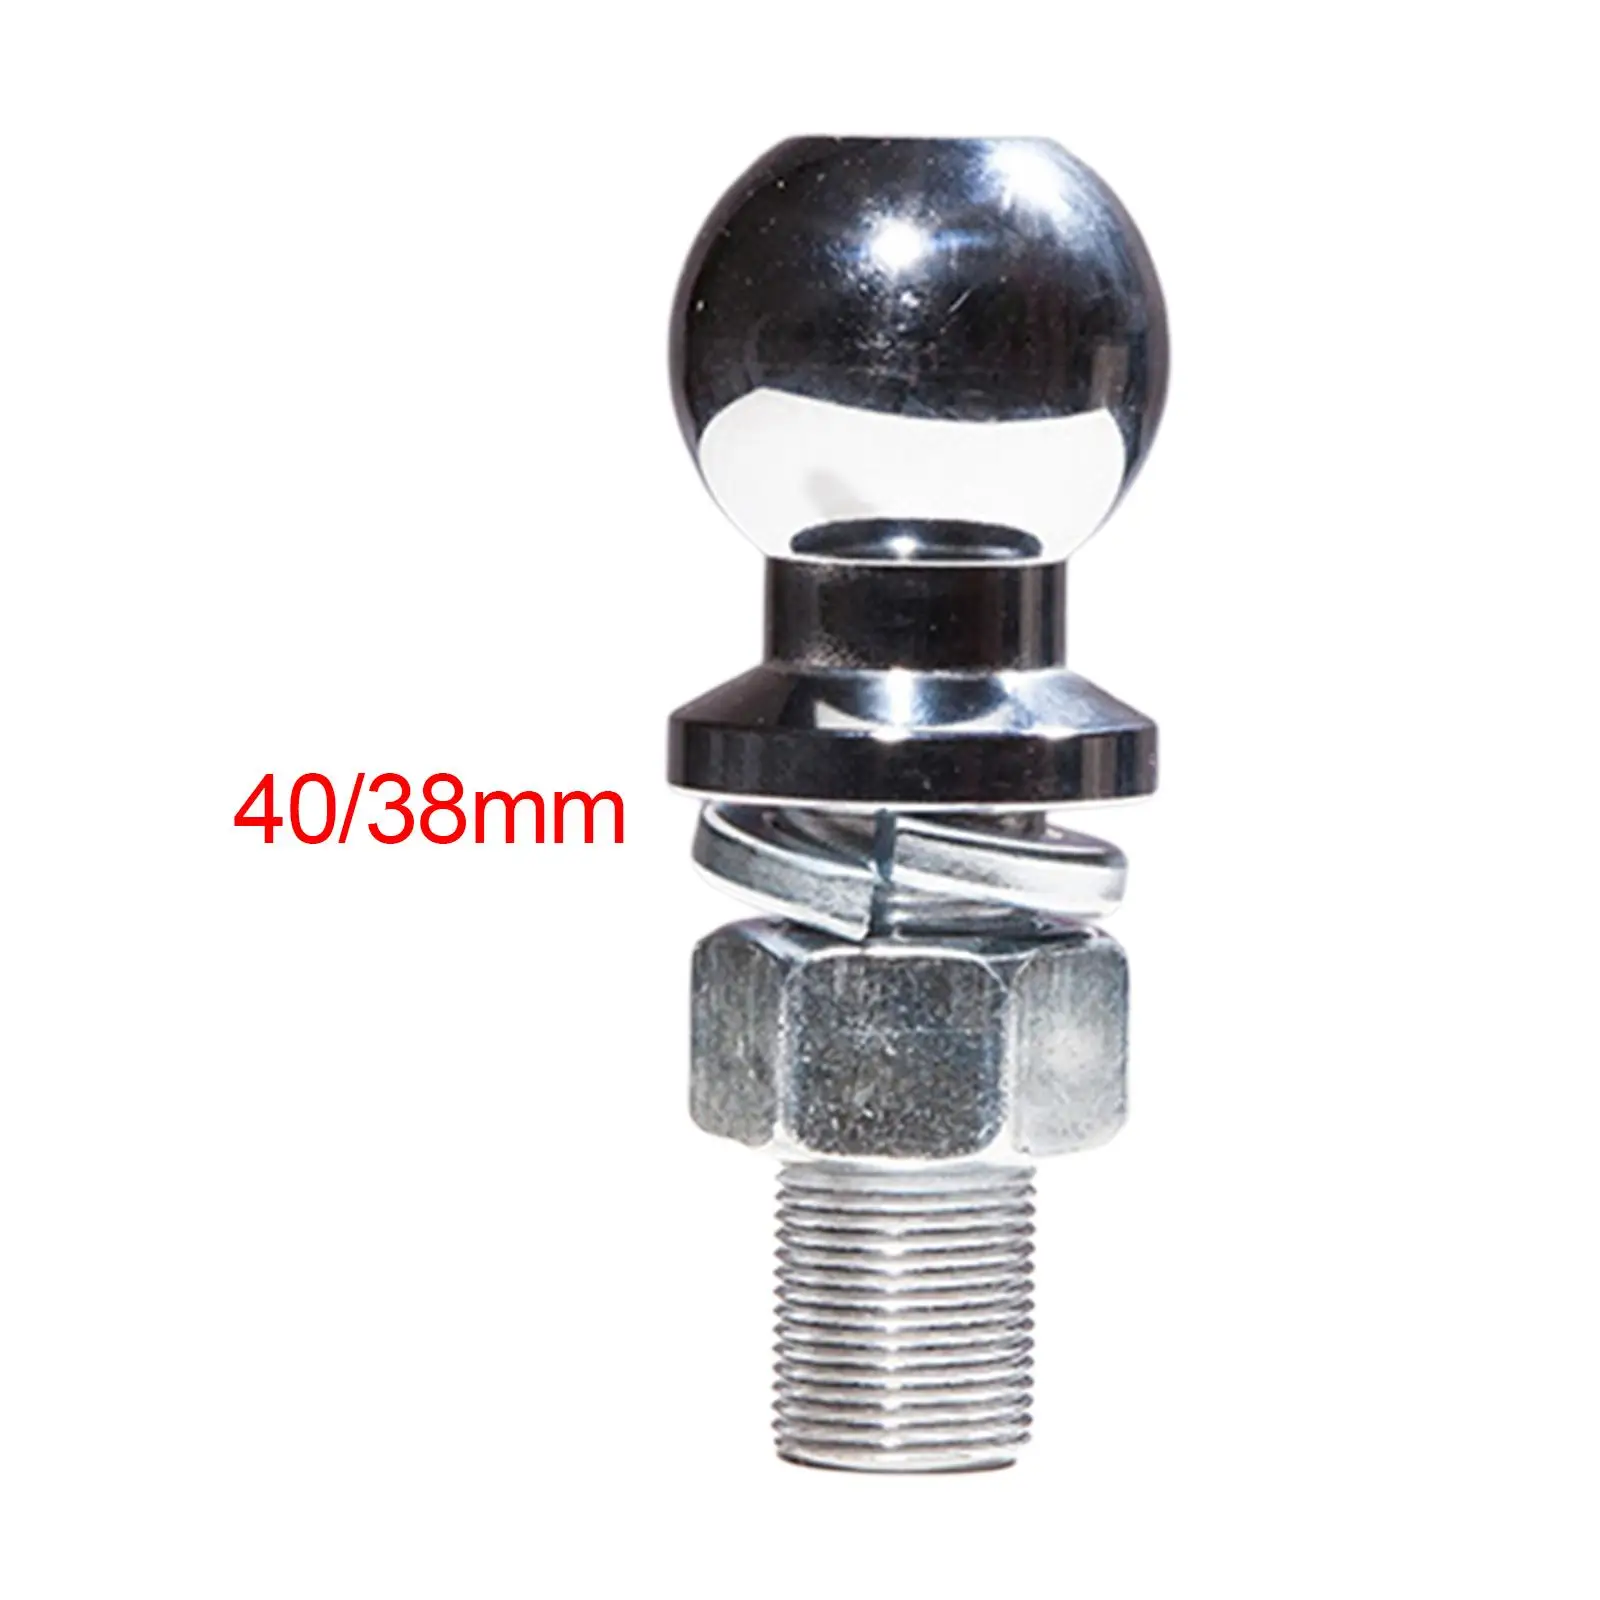 Trailer Connector Ball Head 2 inch Easy to Install Parts for Yacht